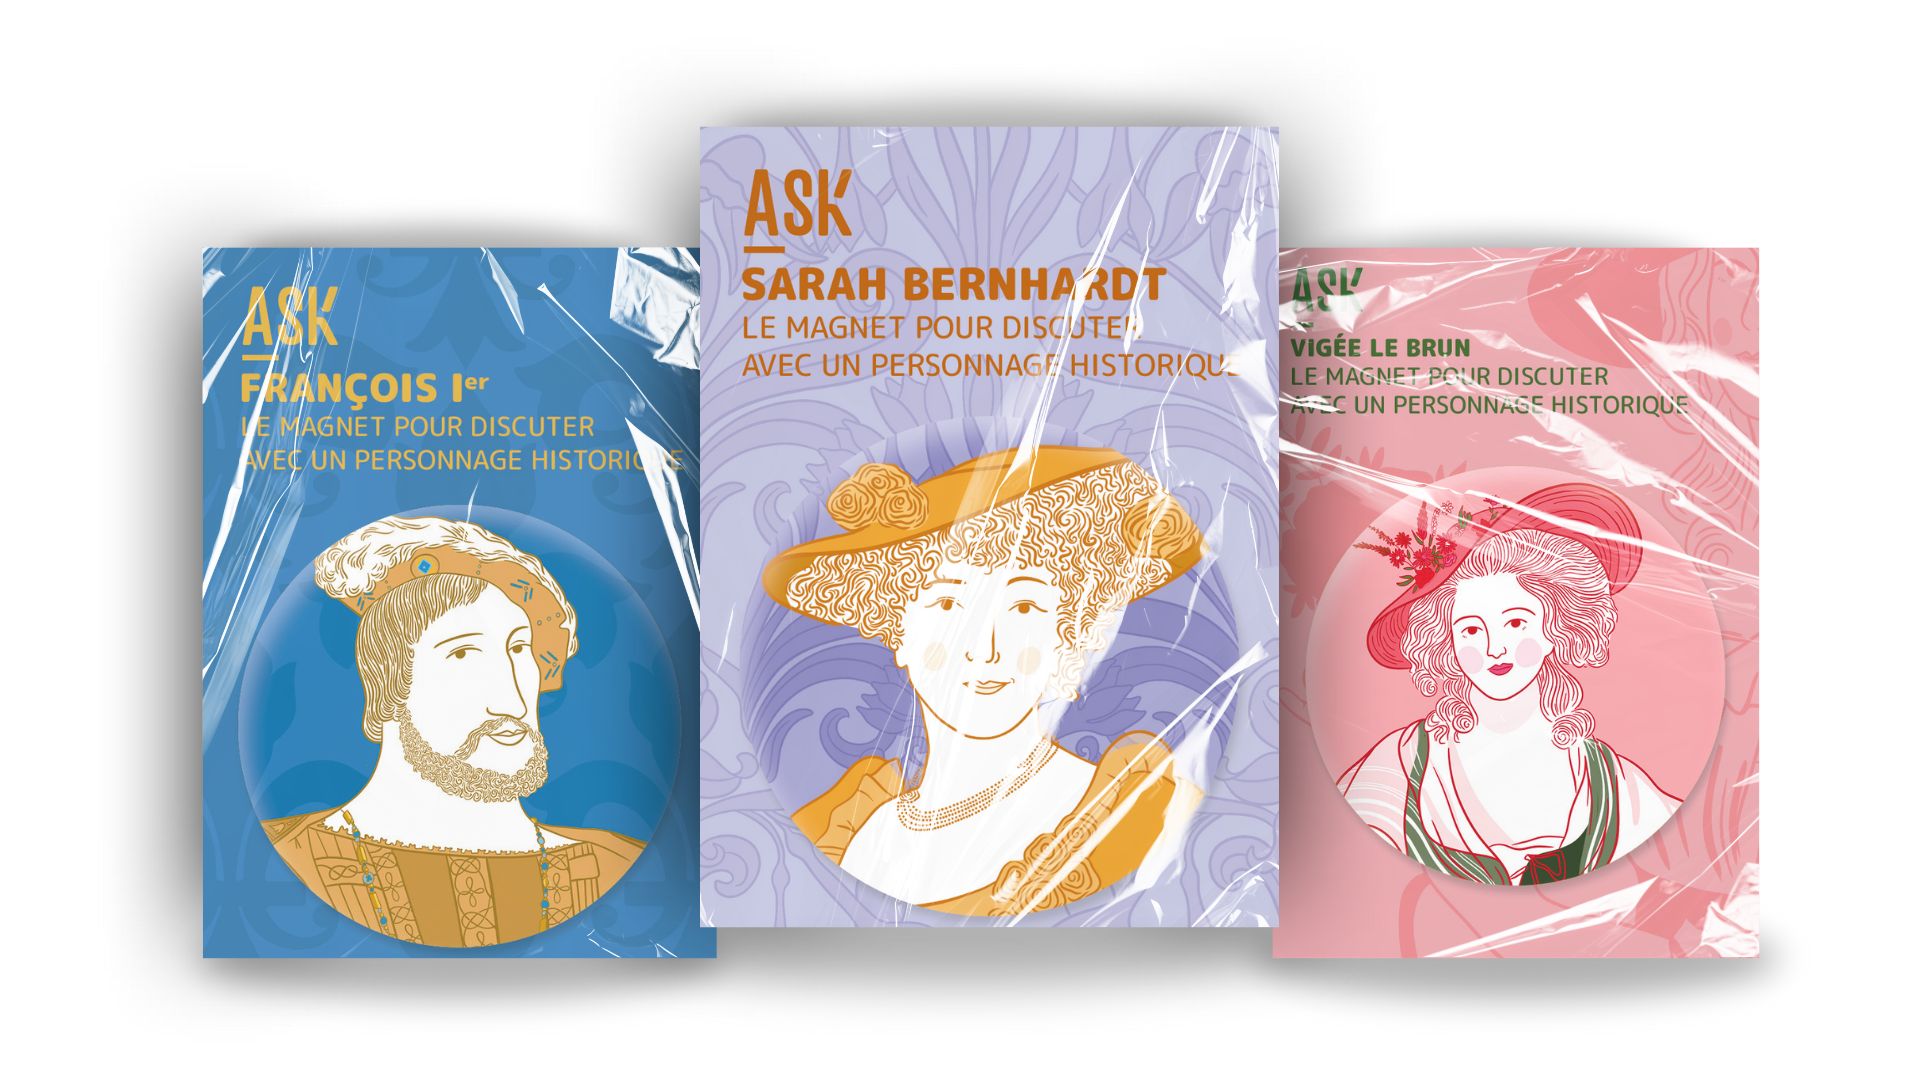 Discover the smart souvenir that brings historical figures to life